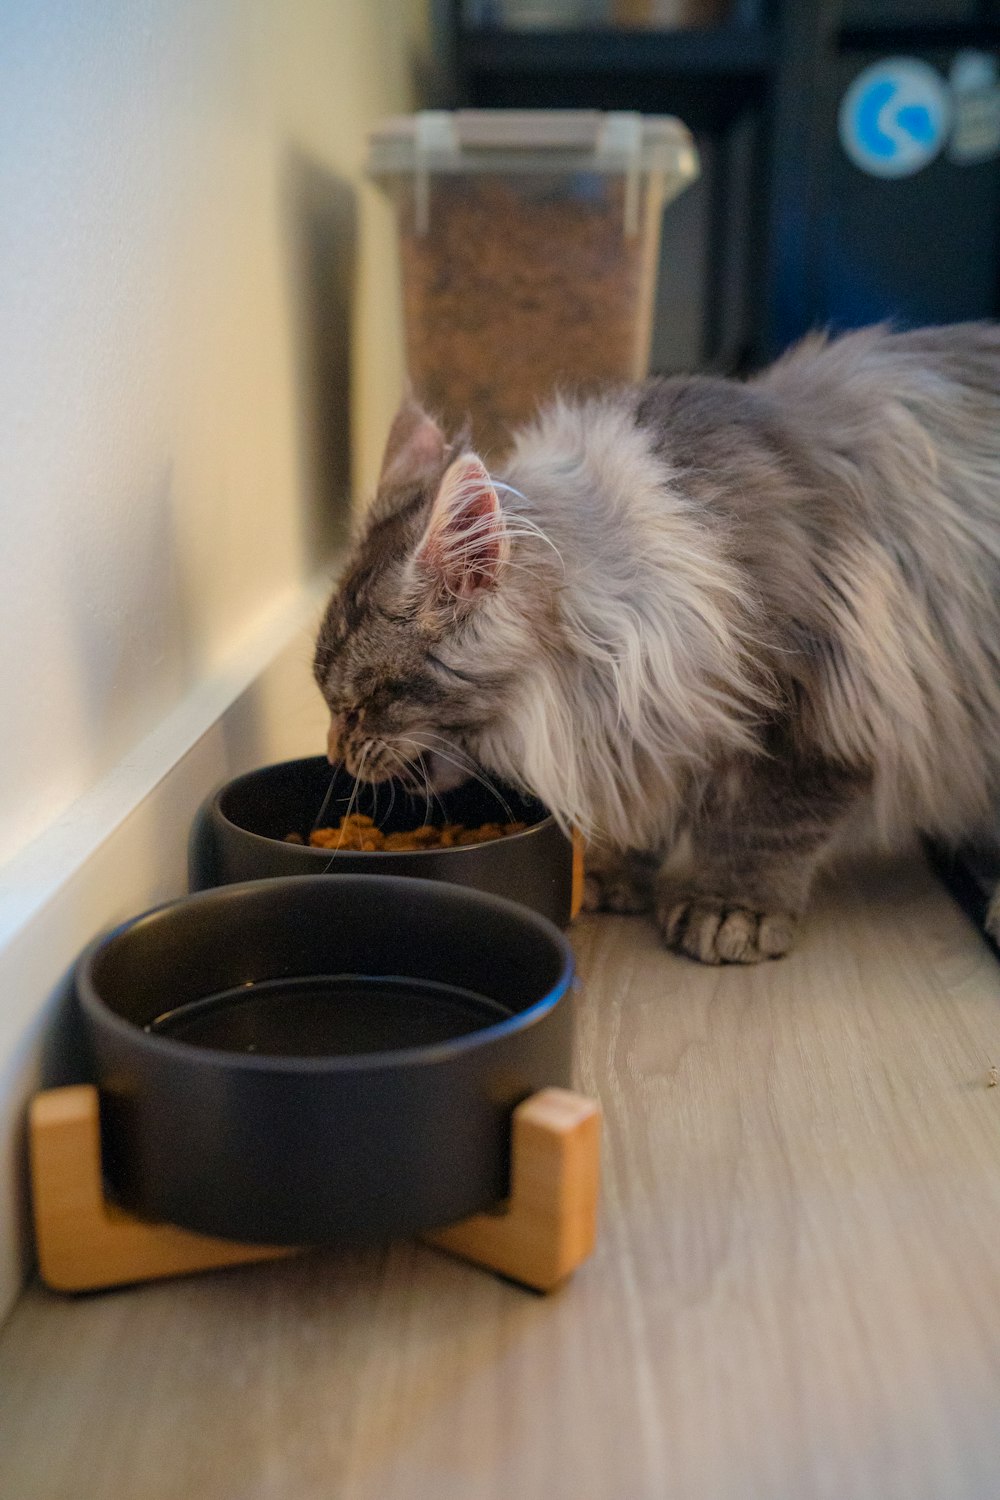 a cat eating food out of a bowl